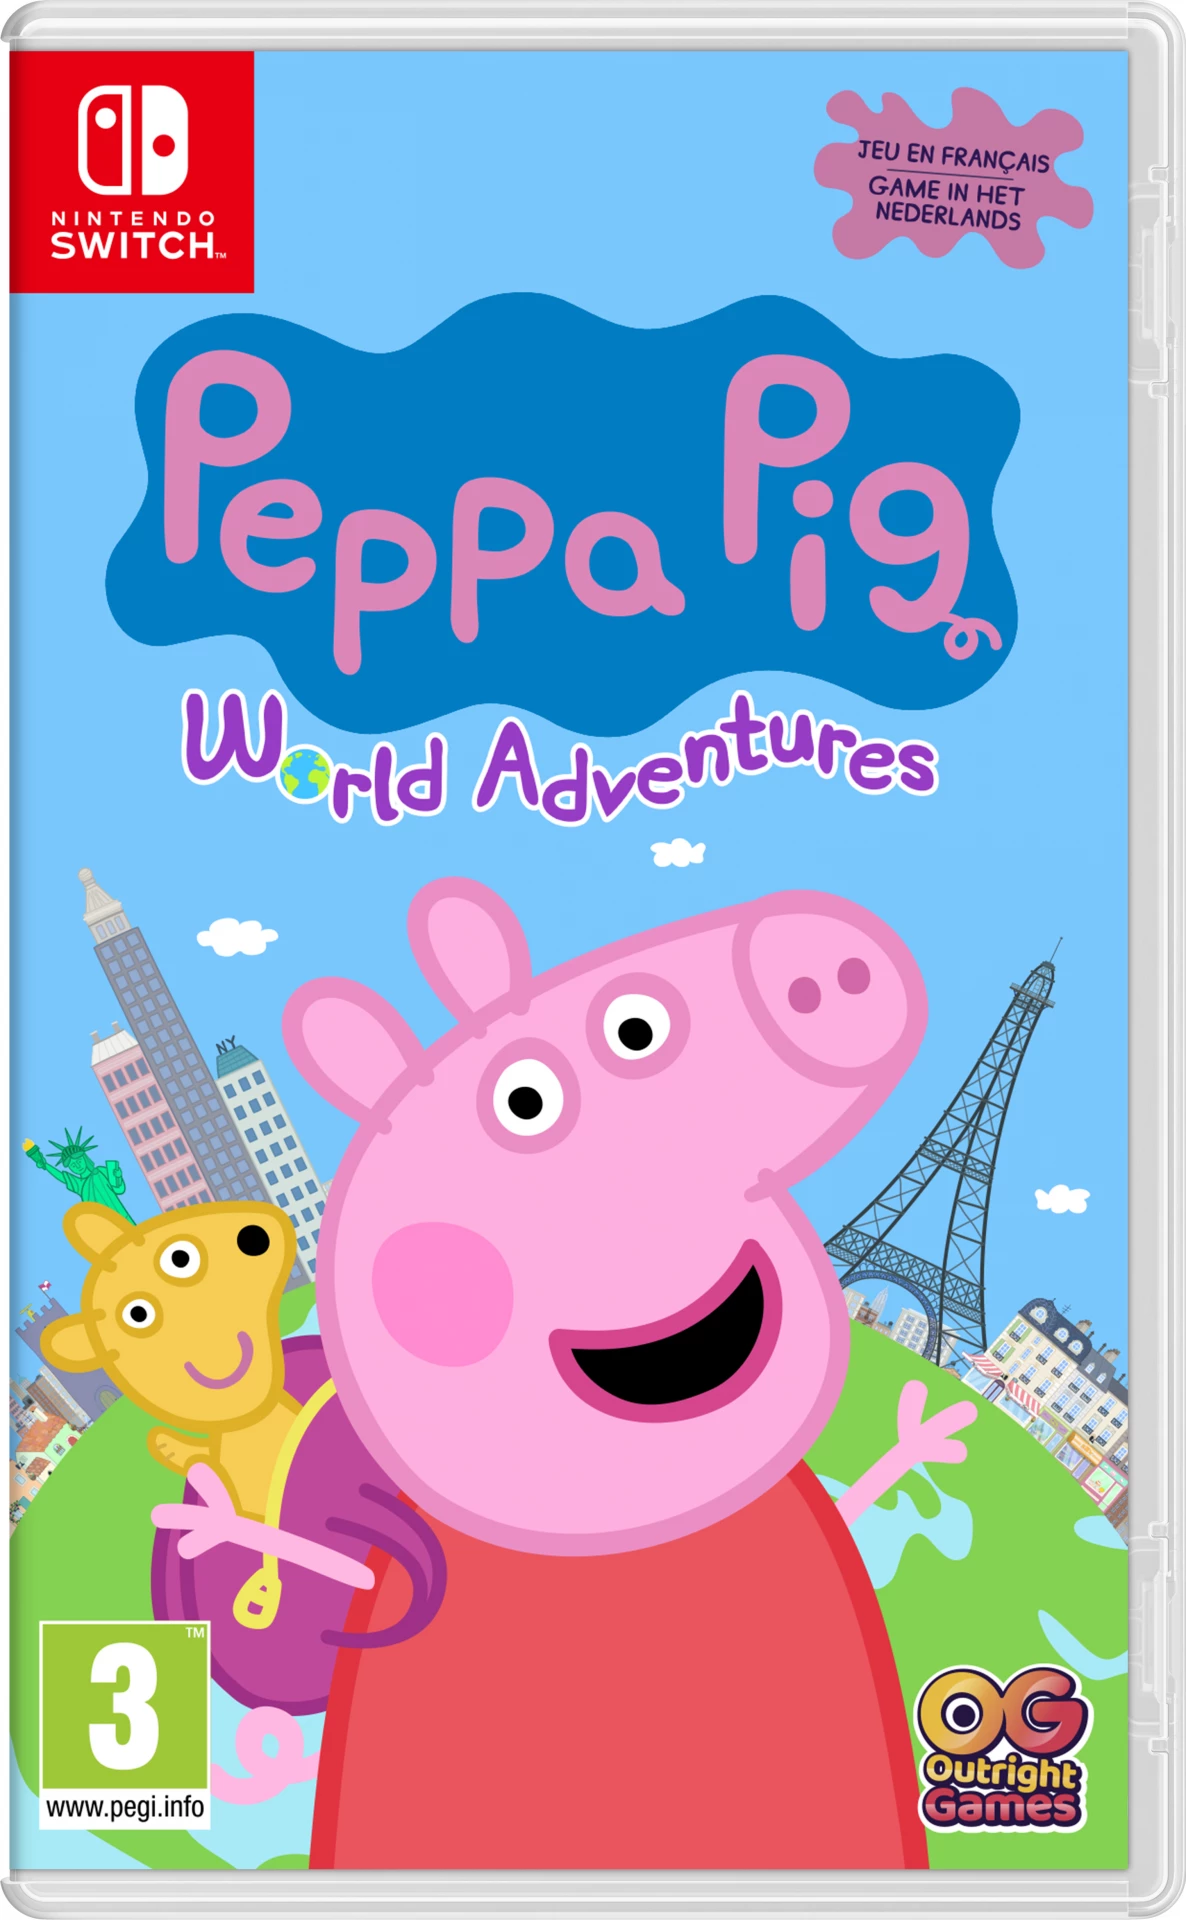 Peppa Pig: World Adventures (Switch), Outright Games